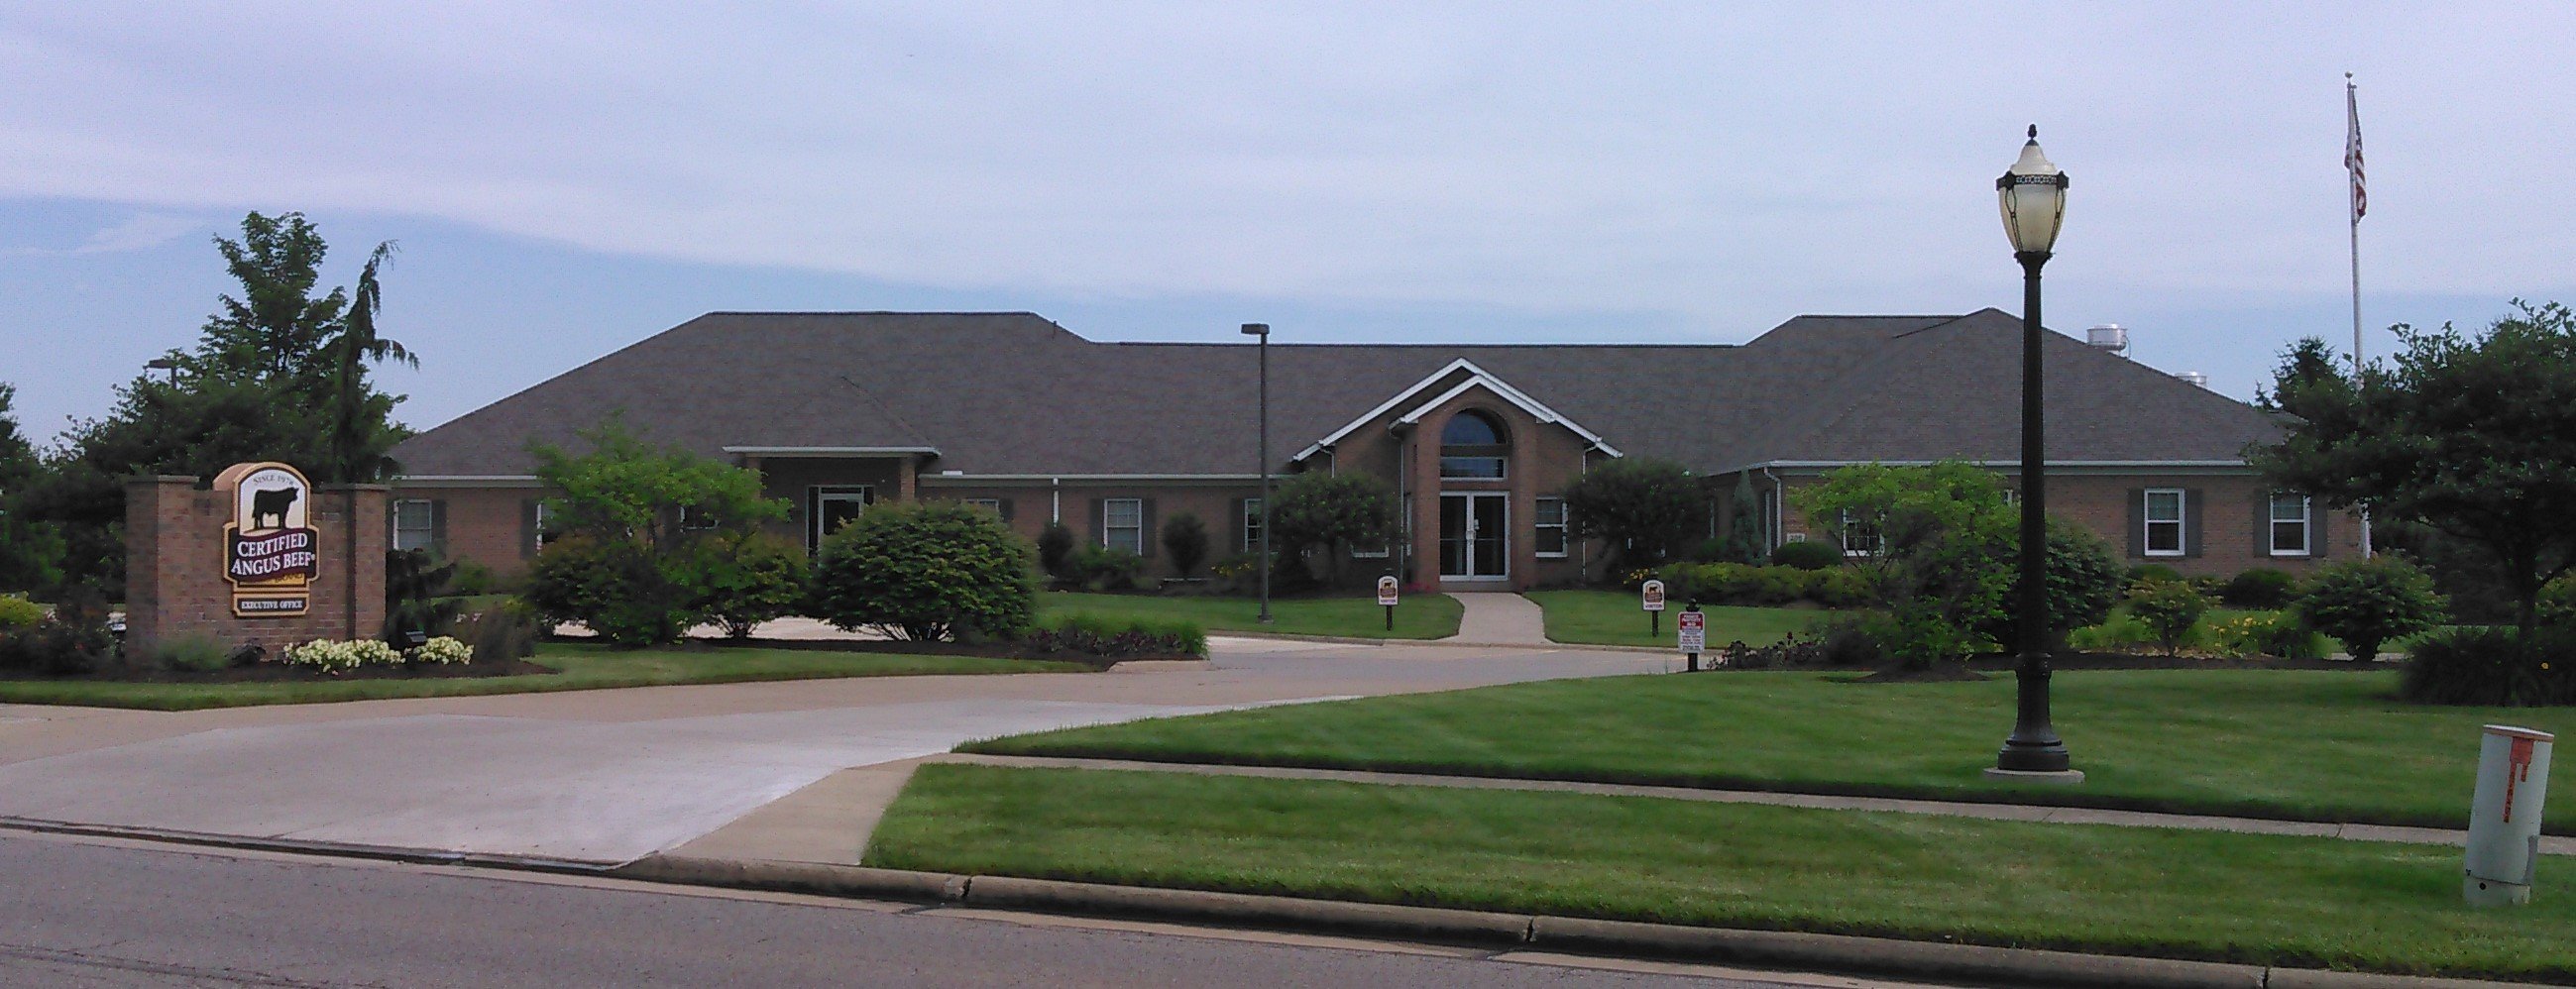 The executive office of Certified Angus Beef. The organization has been headquartered in Wooster since 1994.